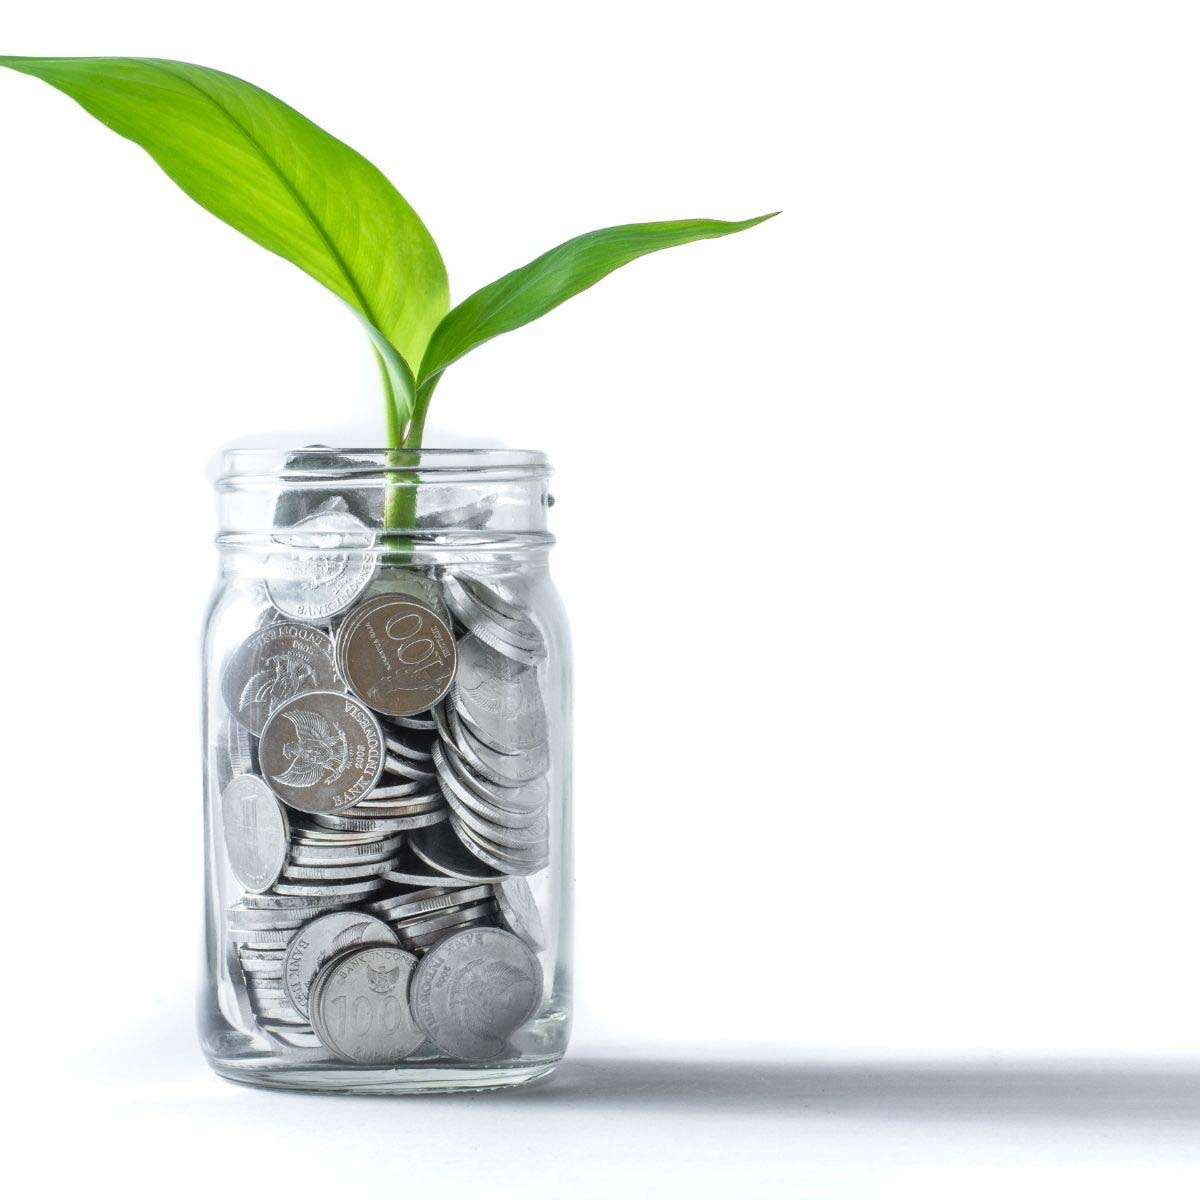 A jar of coins with a plant sprouting at the top to represent money growing.